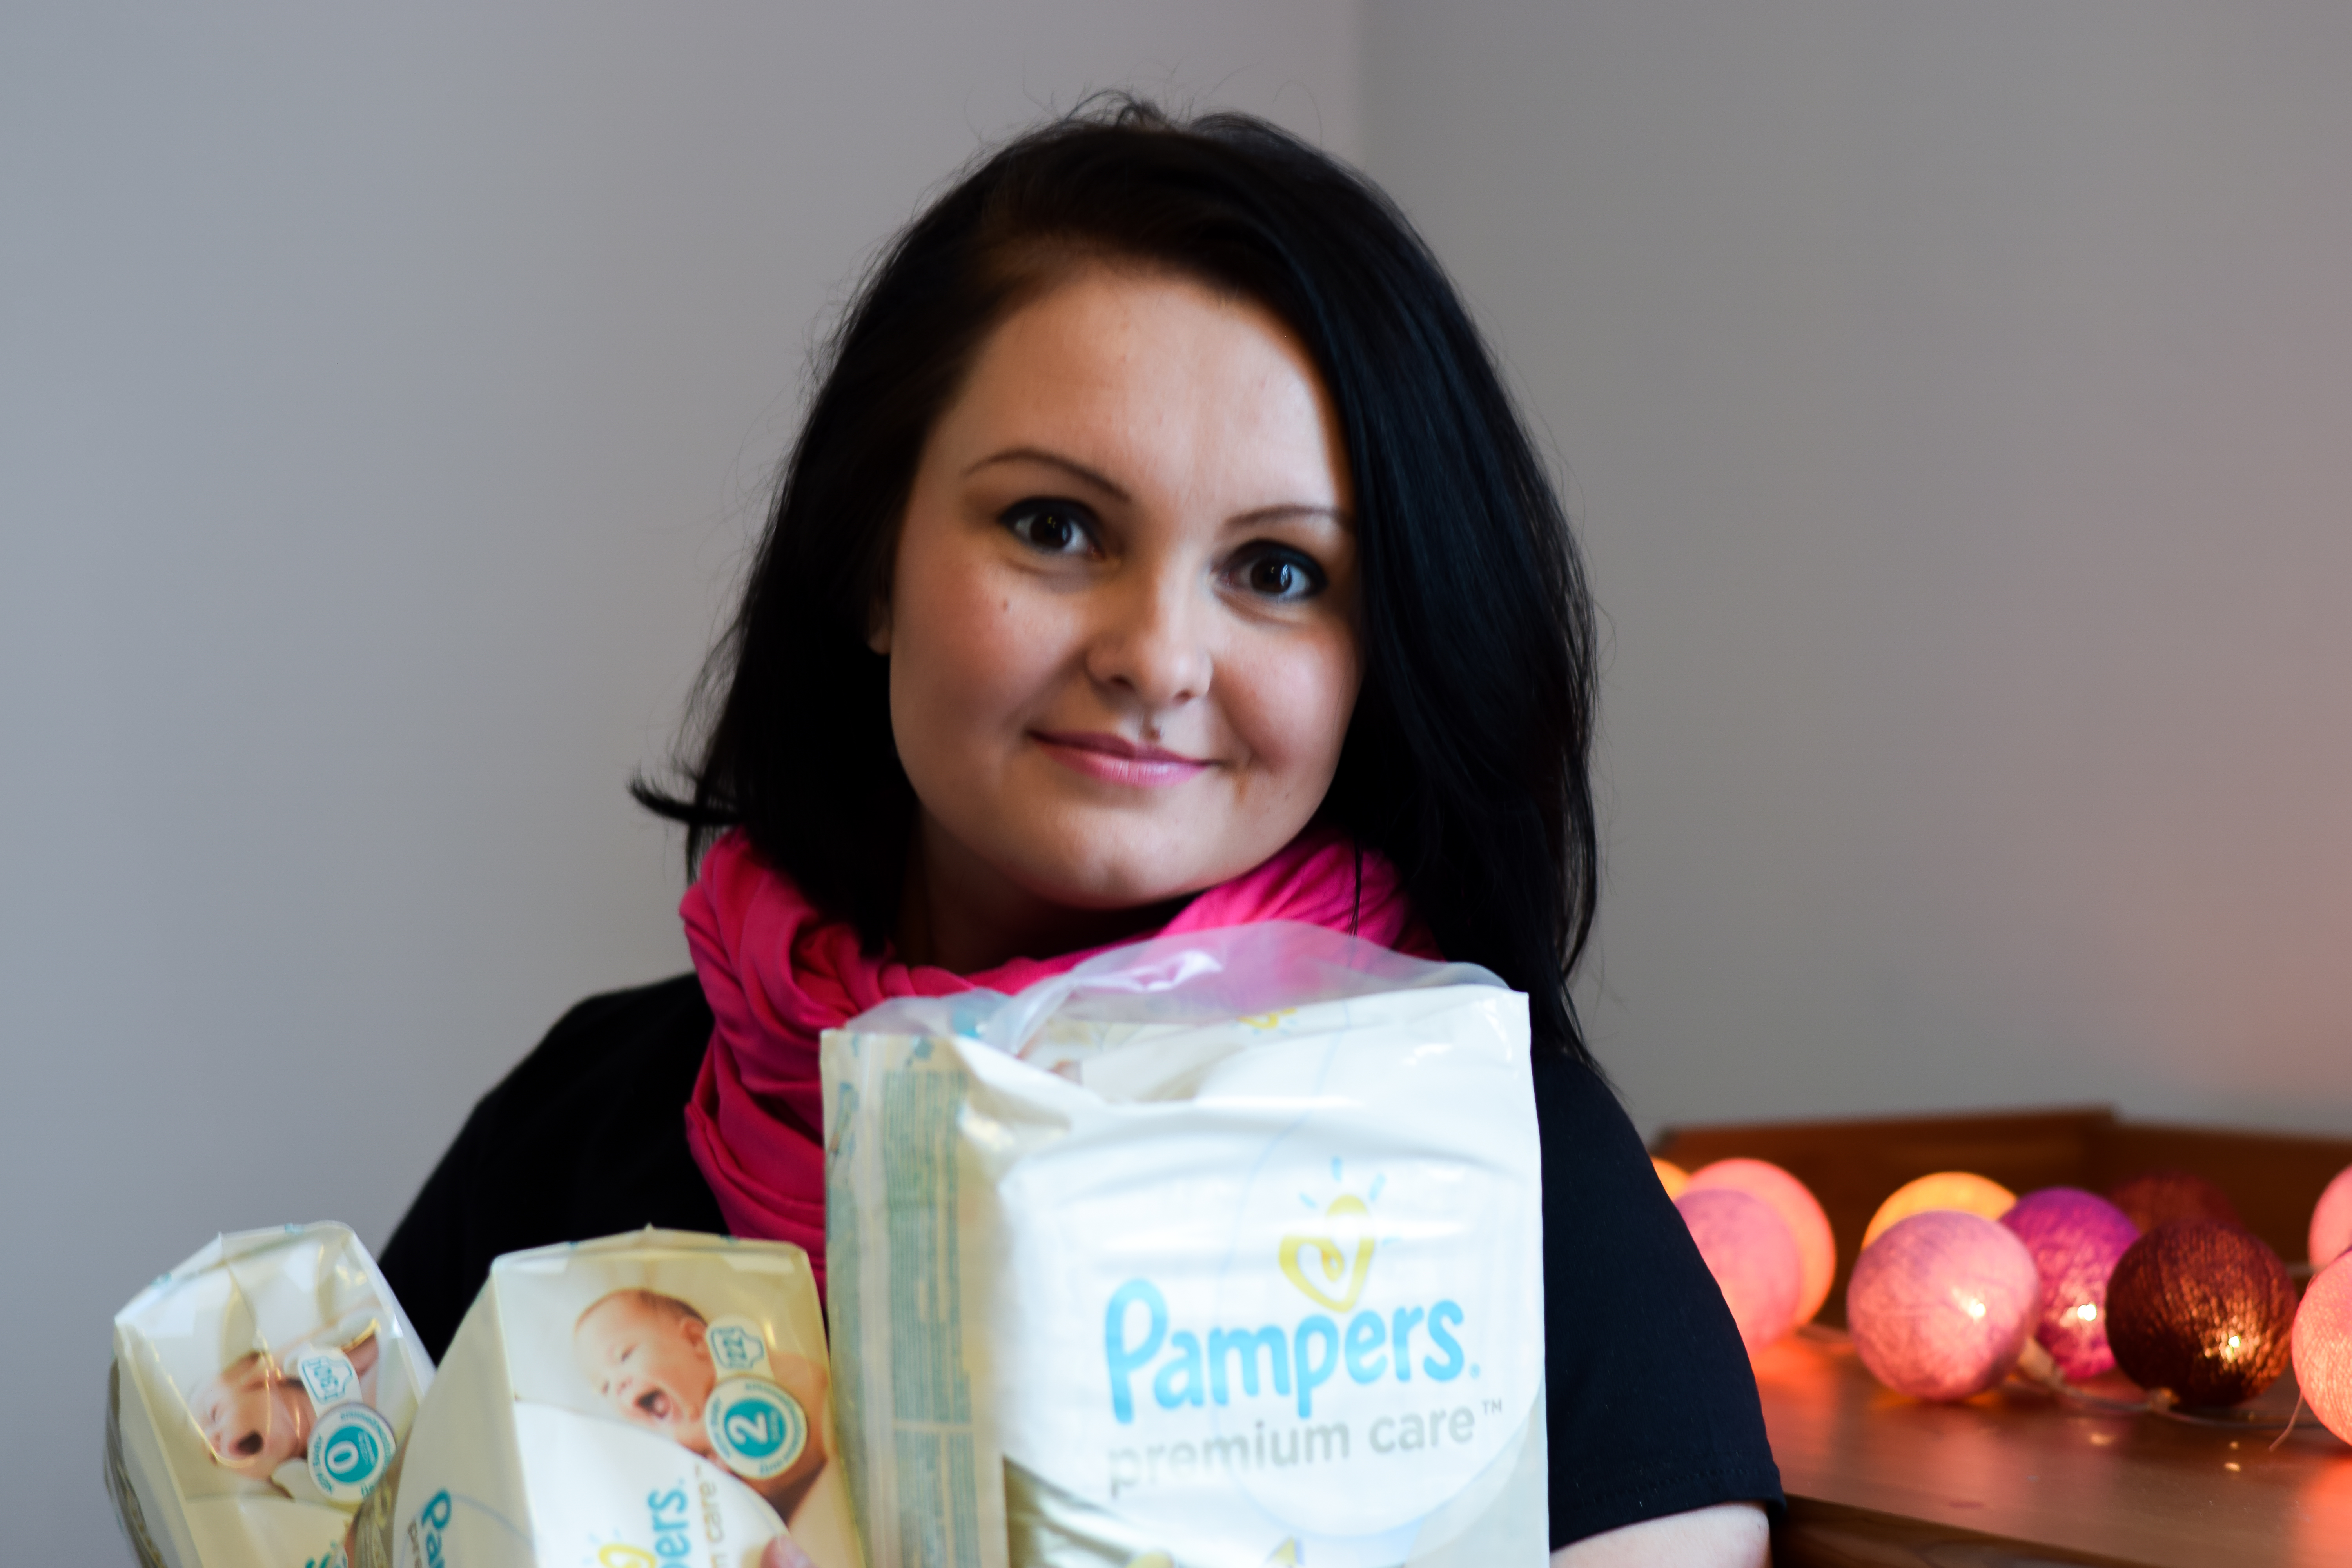 pampers super mama